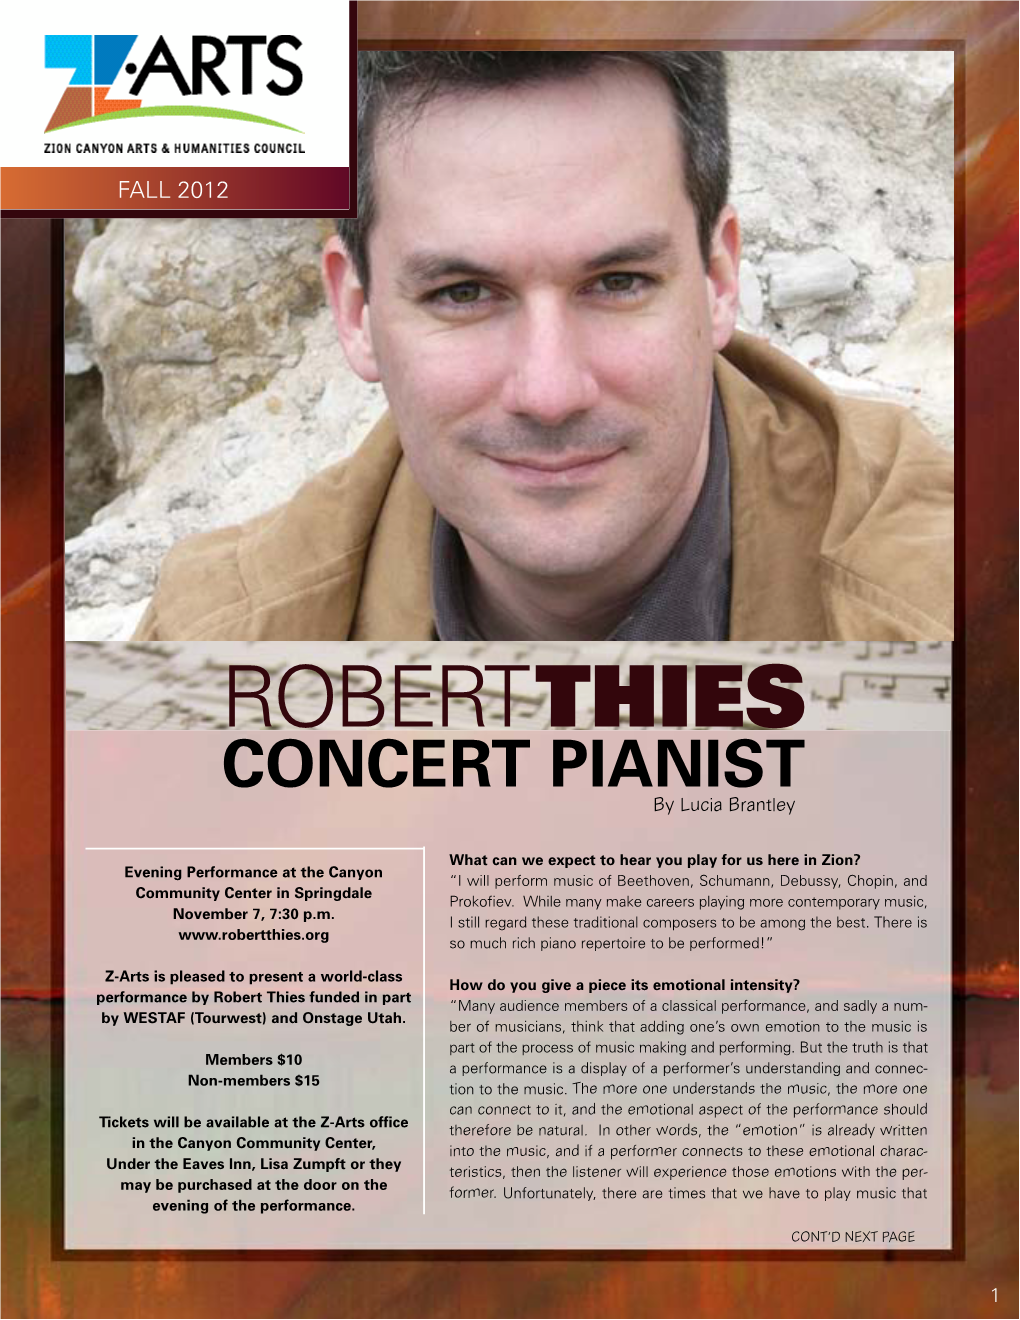 R O B E RTTHIES CONCERT PIANIST by Lucia Brantley